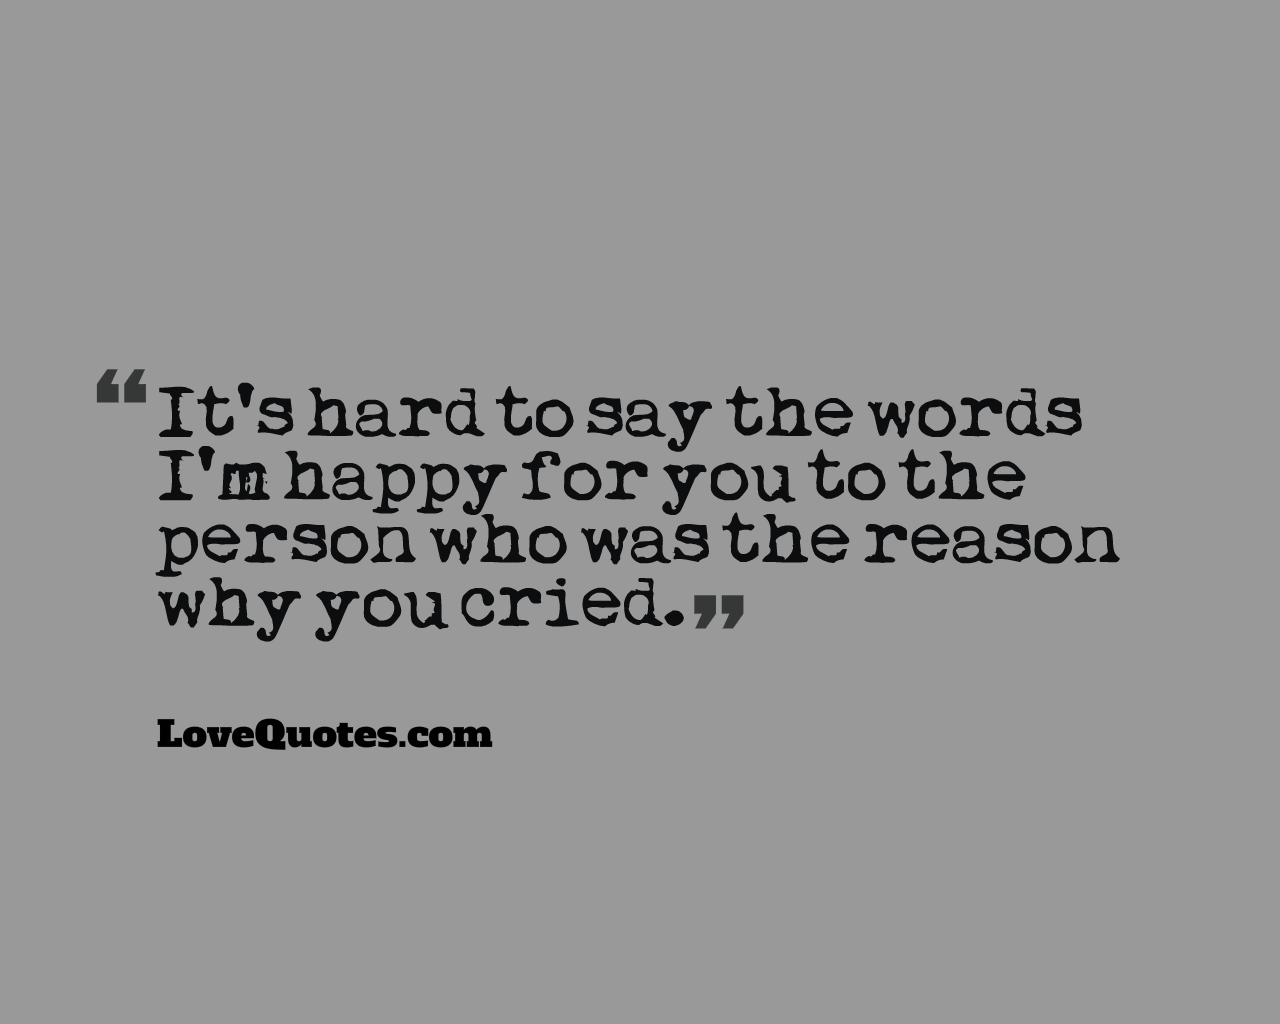 I'm Happy For You - Love Quotes